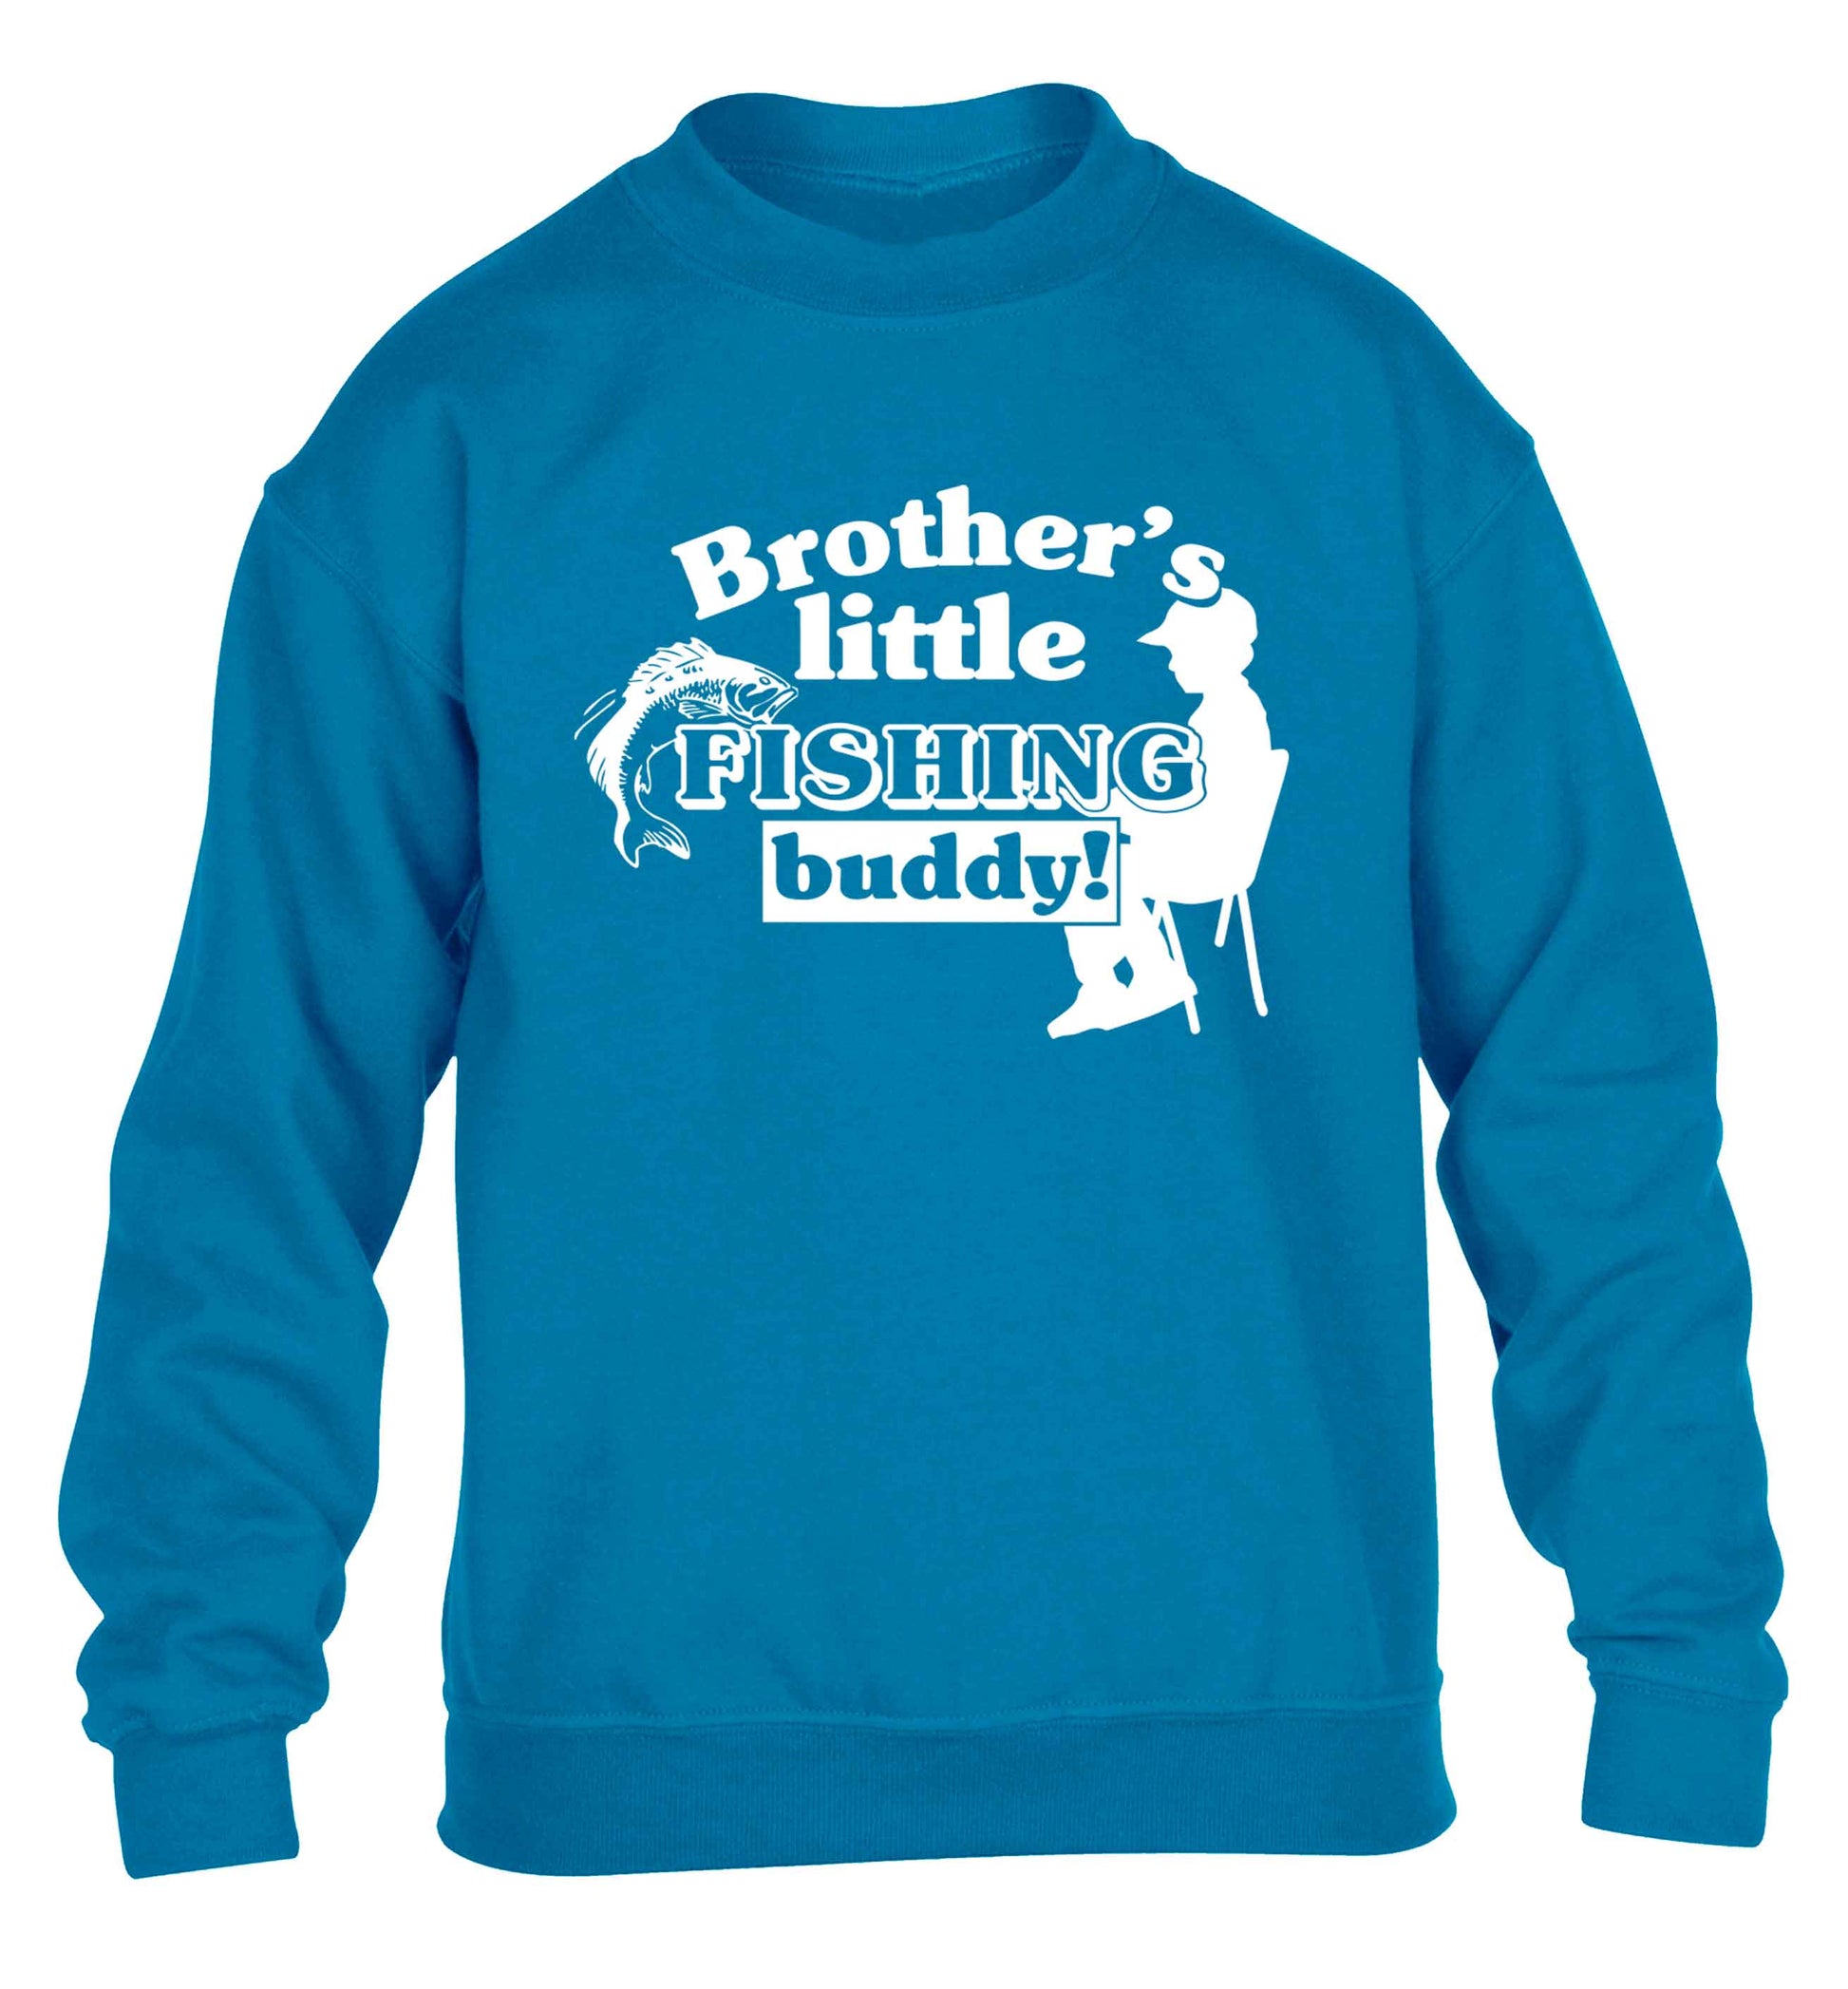 Brother's little fishing buddy children's blue sweater 12-13 Years